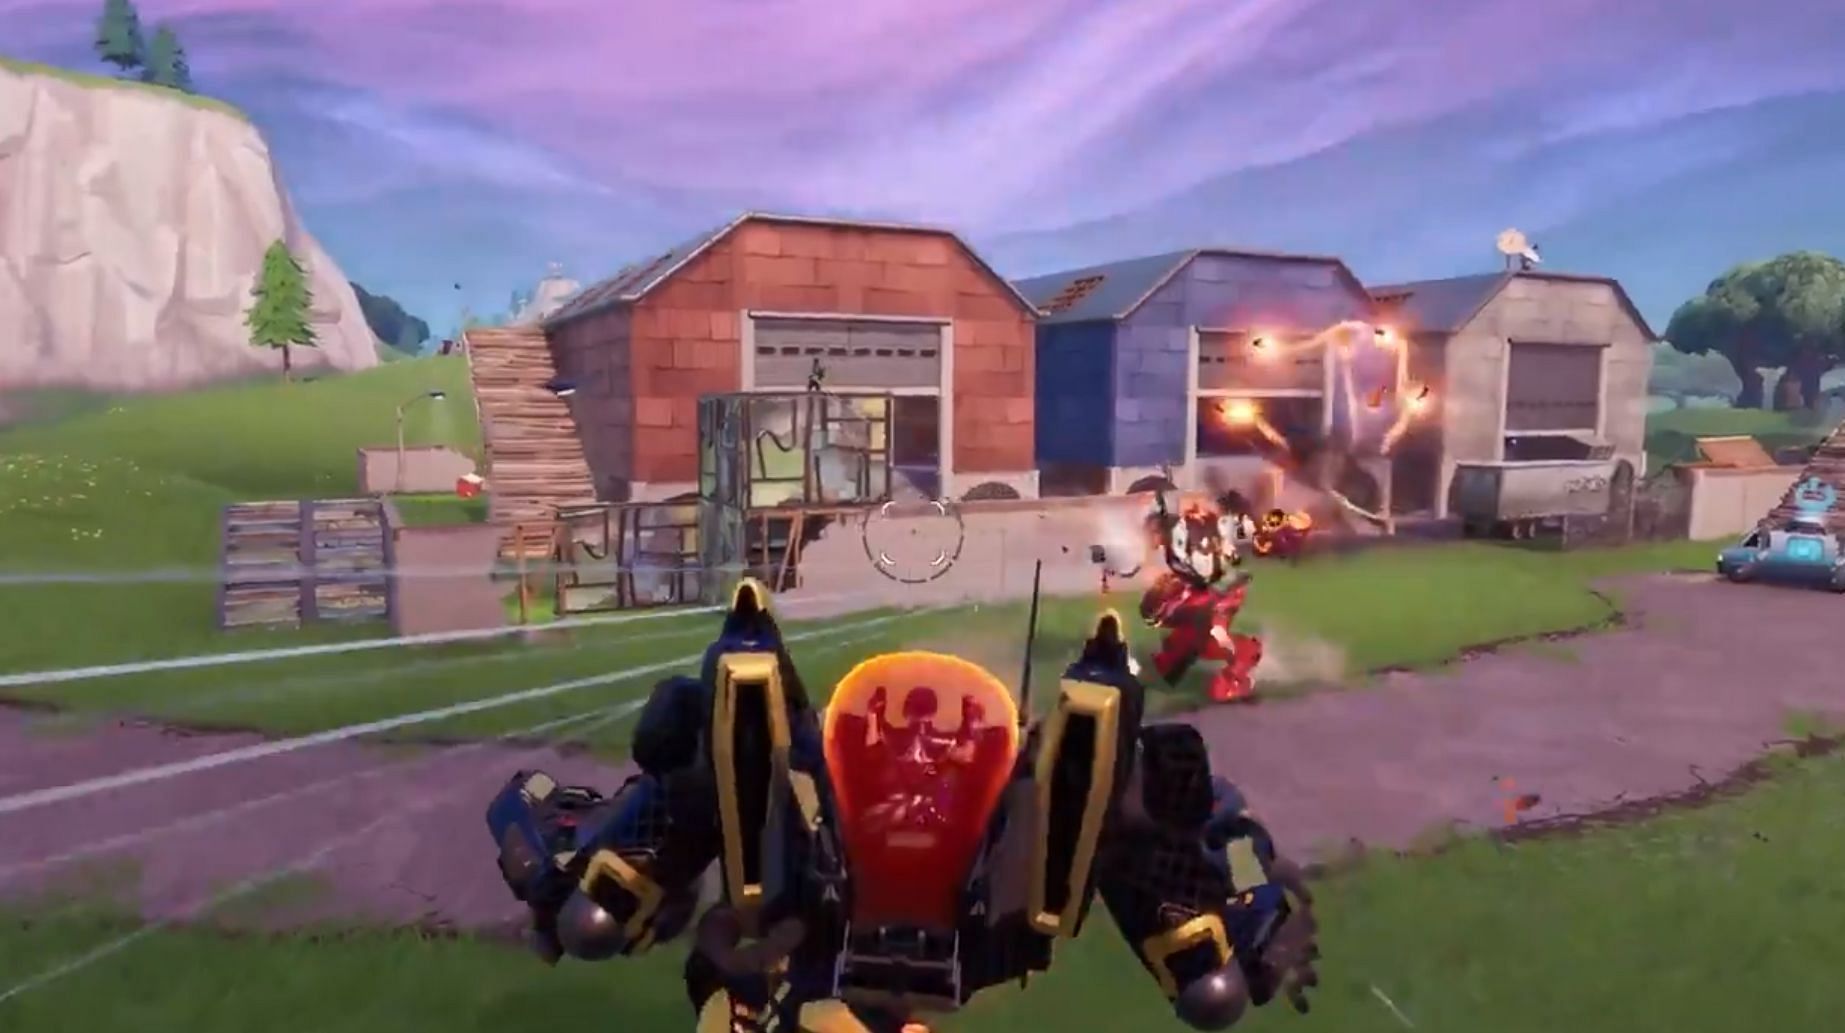 Mechs were another overpowered vehicle that bothered Fortnite players (Image via Epic Games)